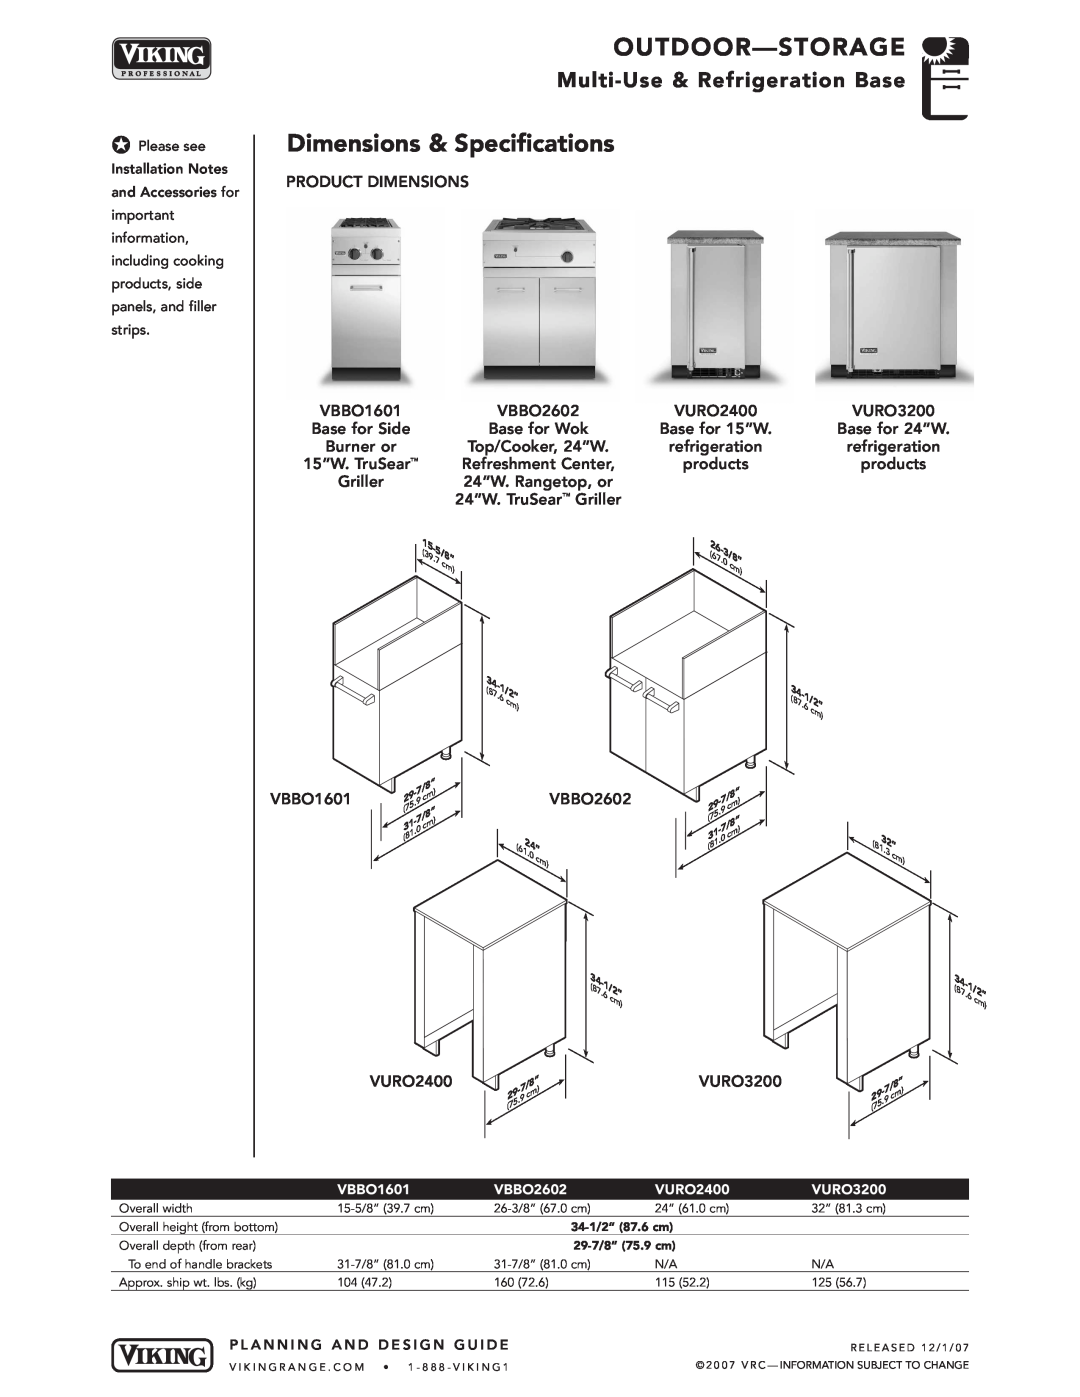 Viking VGBQ3002T1NSS manual 03/8”, Outdoor - Storage, Dimensions & Specifications, Multi-Use & Refrigeration Base, VBBO1601 